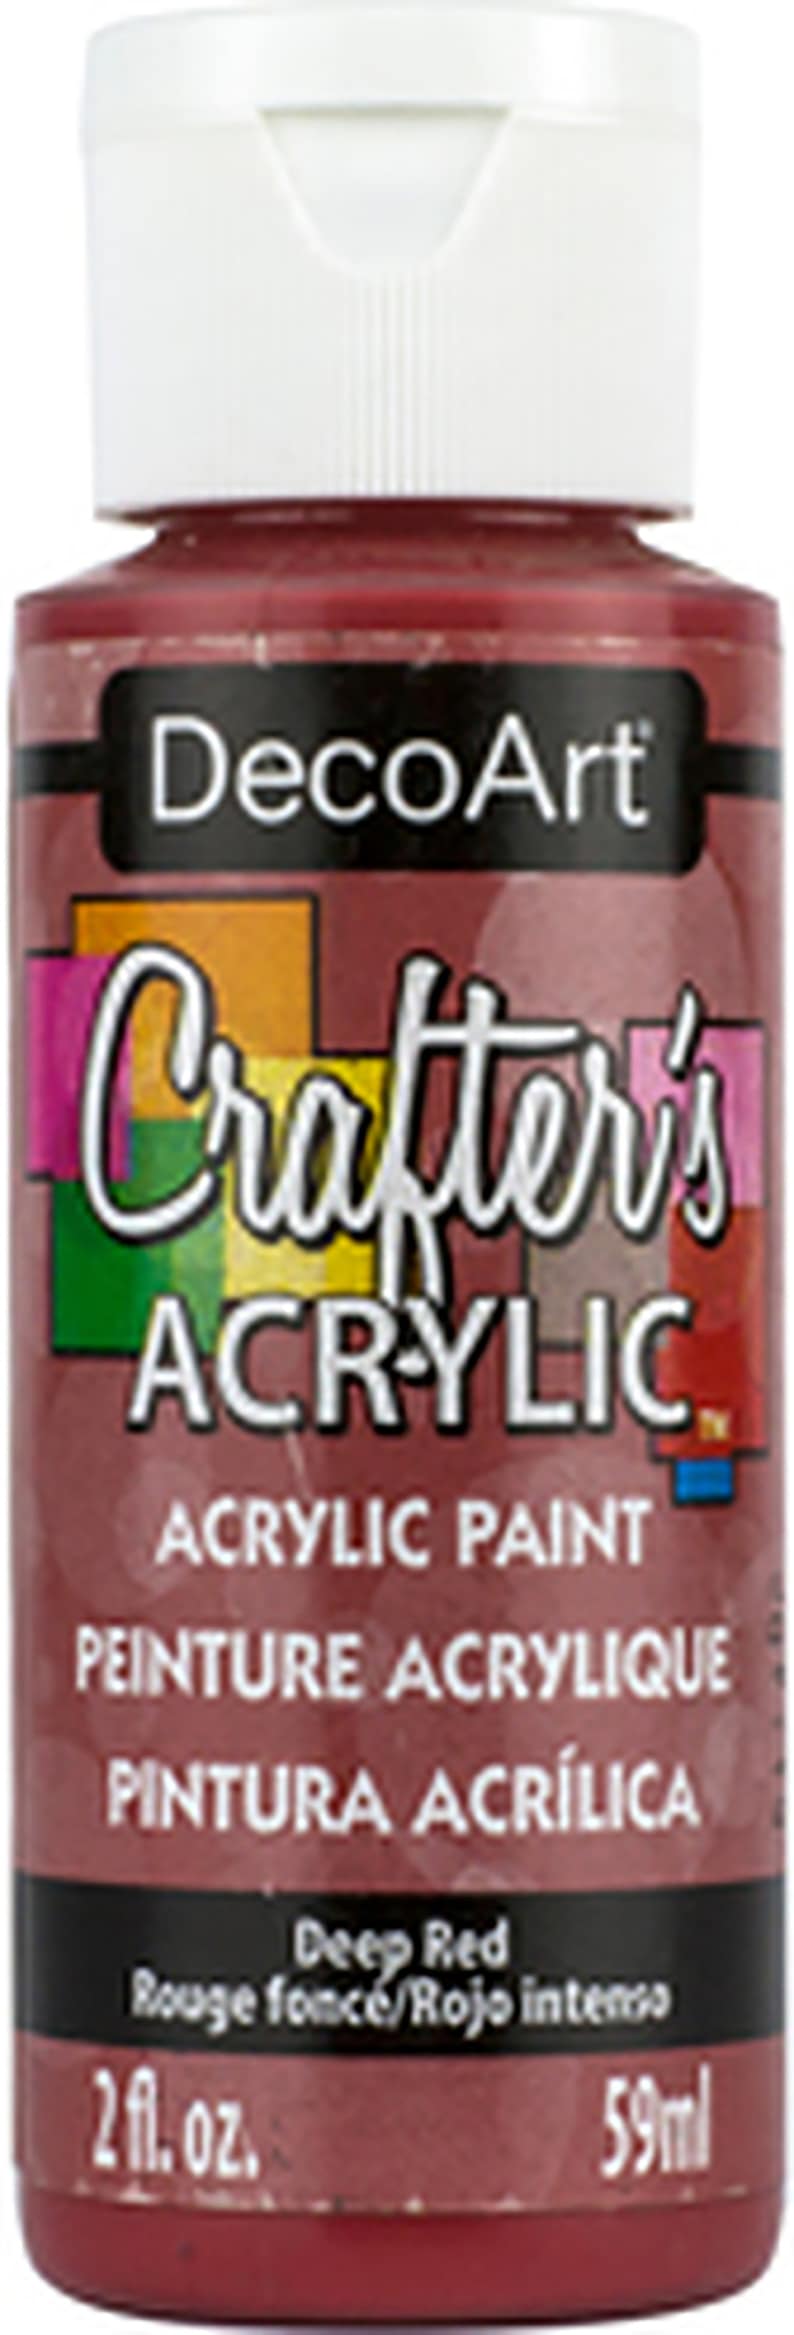 DecoArt Crafters Acrylic Paints Red Tones 59ml 2oz bottles Craft Paints Deep Red DCA21